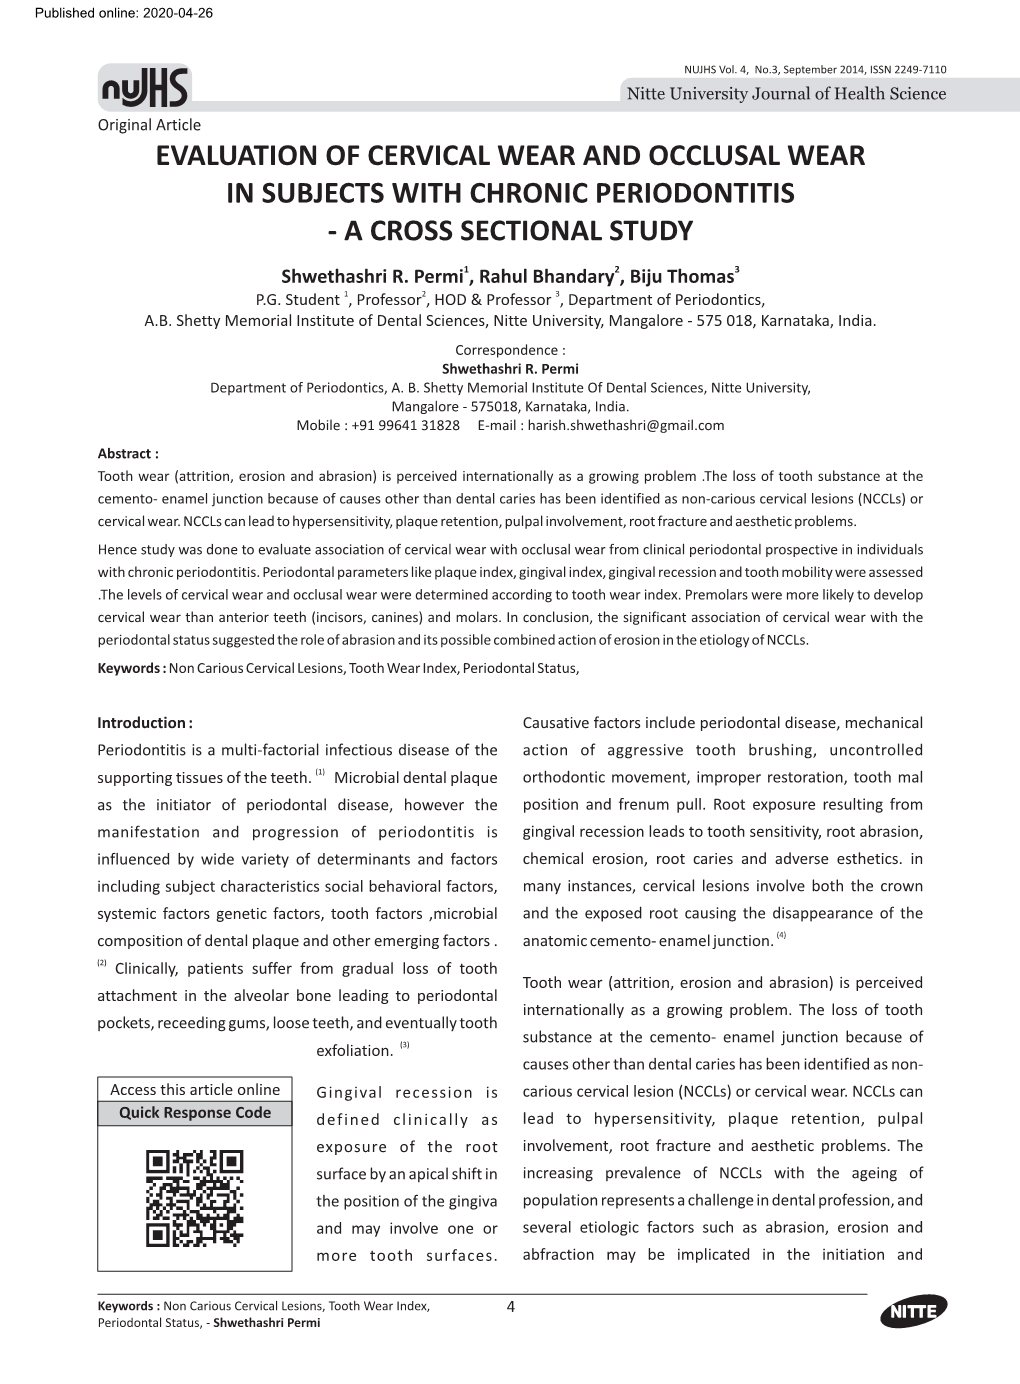 EVALUATION of CERVICAL WEAR and OCCLUSAL WEAR in SUBJECTS with CHRONIC PERIODONTITIS - a CROSS SECTIONAL STUDY Shwethashri R